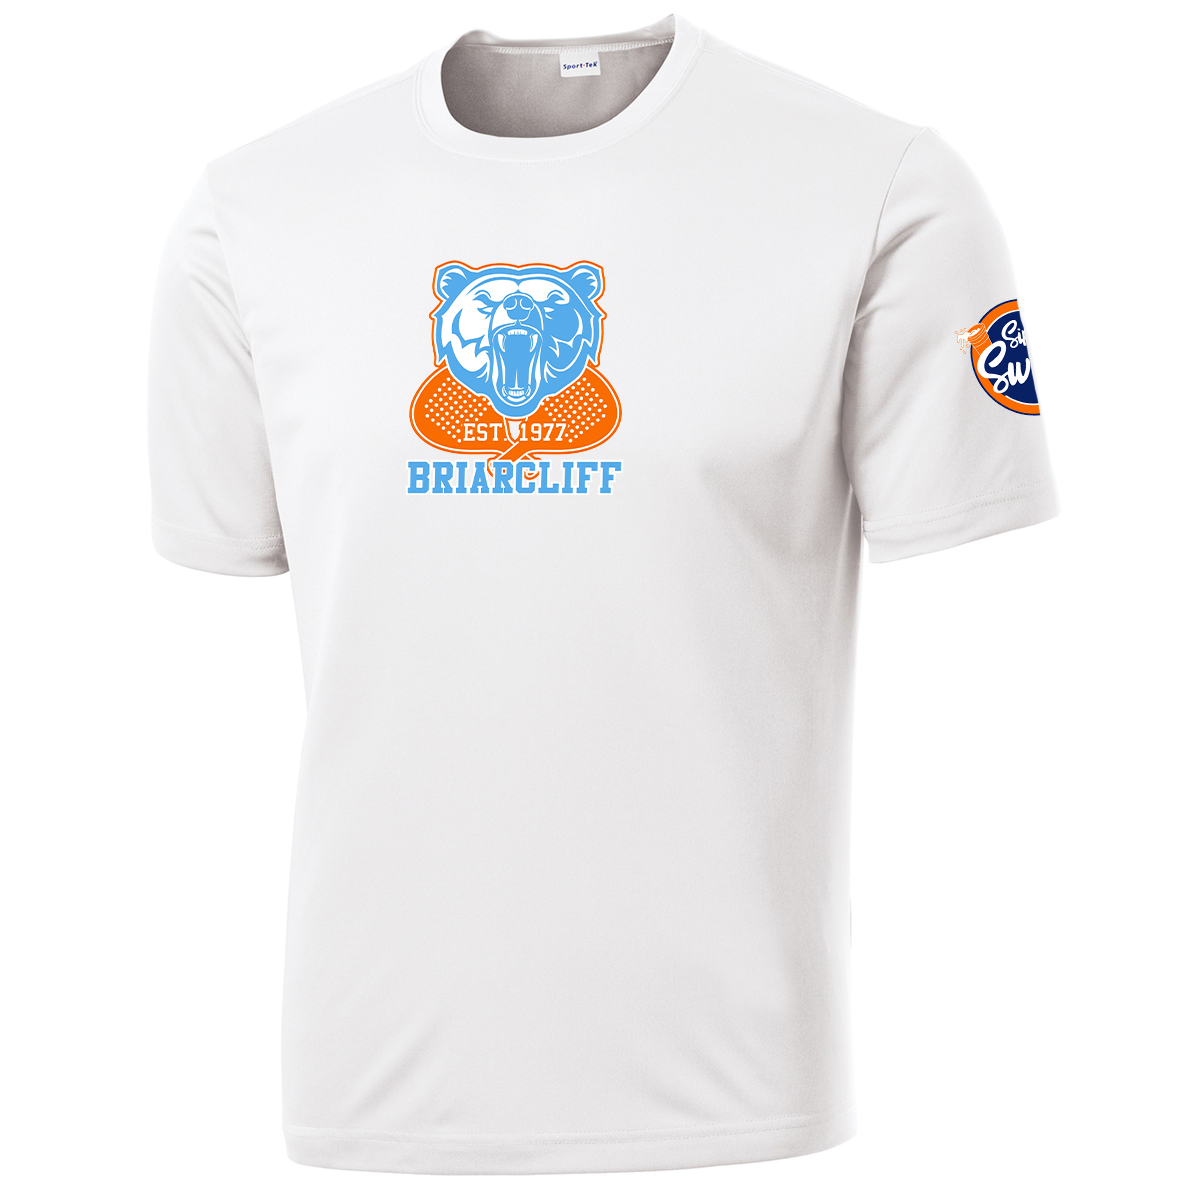 Briarcliff Paddle Performance T-Shirt